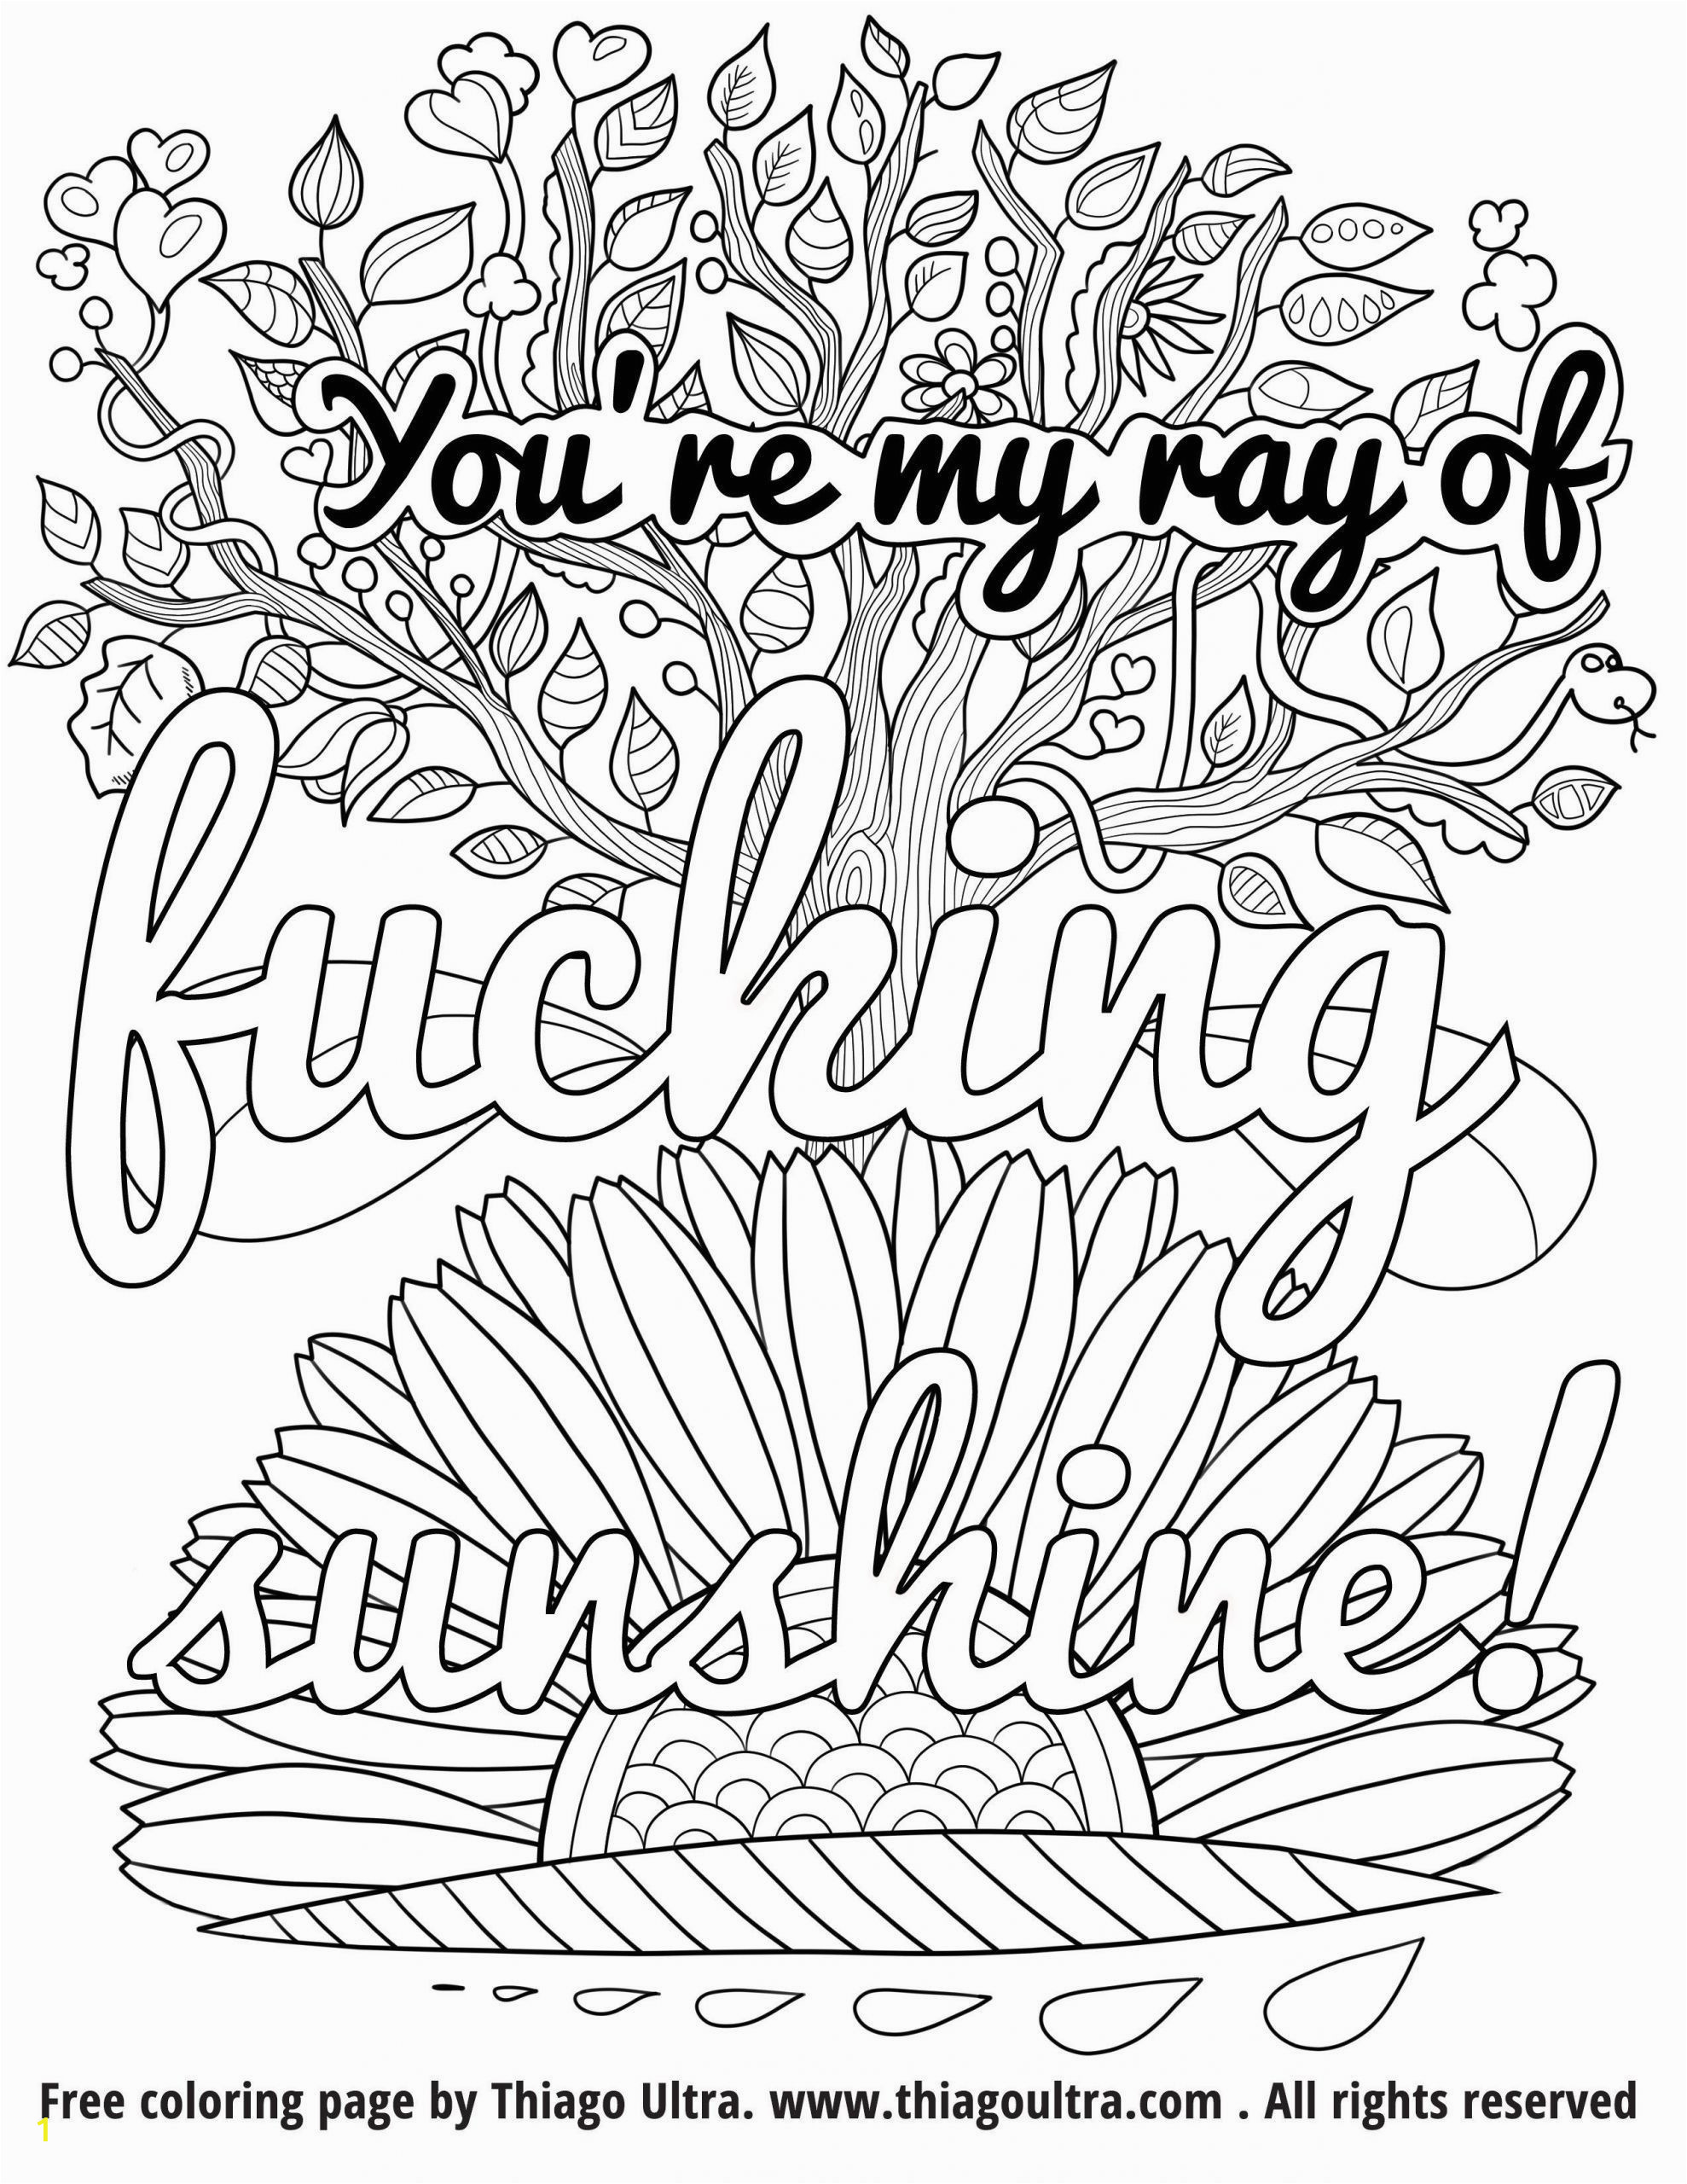 coloring pages for adults swear words inspirational 4 coloring pages to color adults ly coloring books awesome of coloring pages for adults swear words